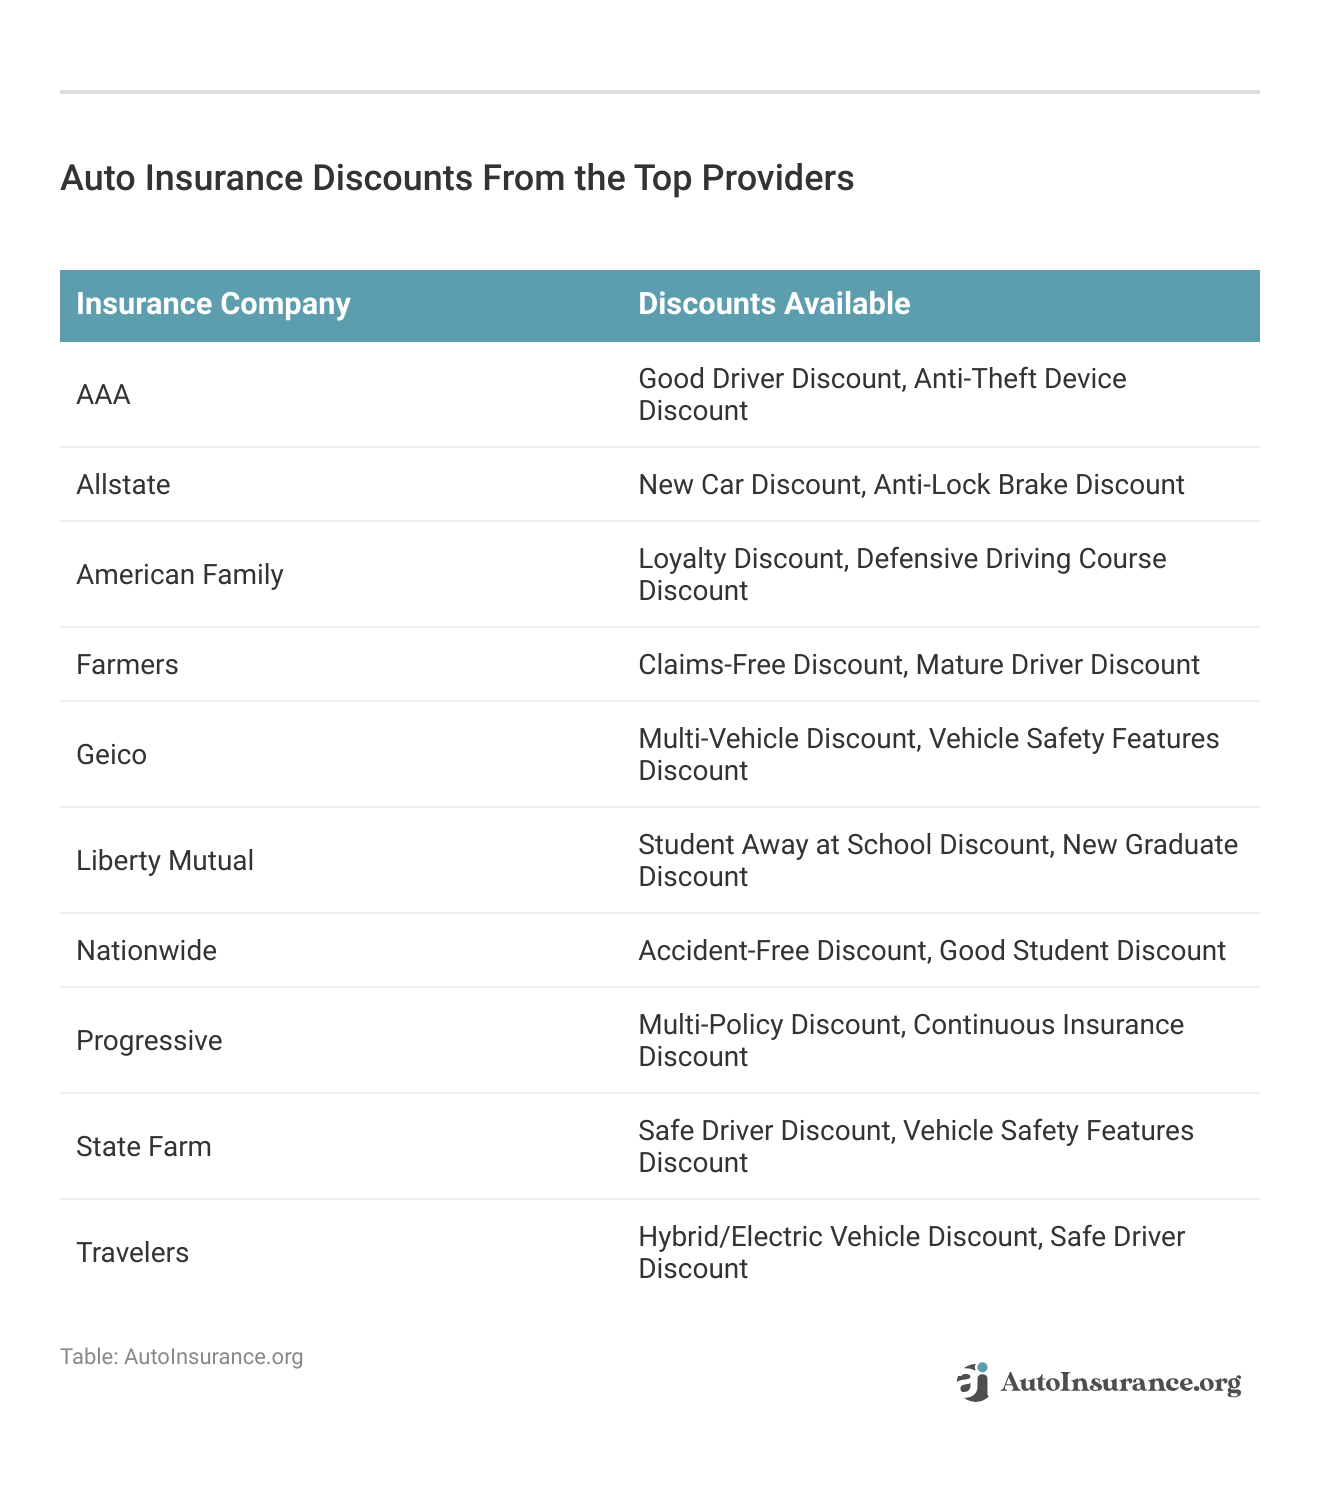 <h3>Auto Insurance Discounts From the Top Providers</h3> 